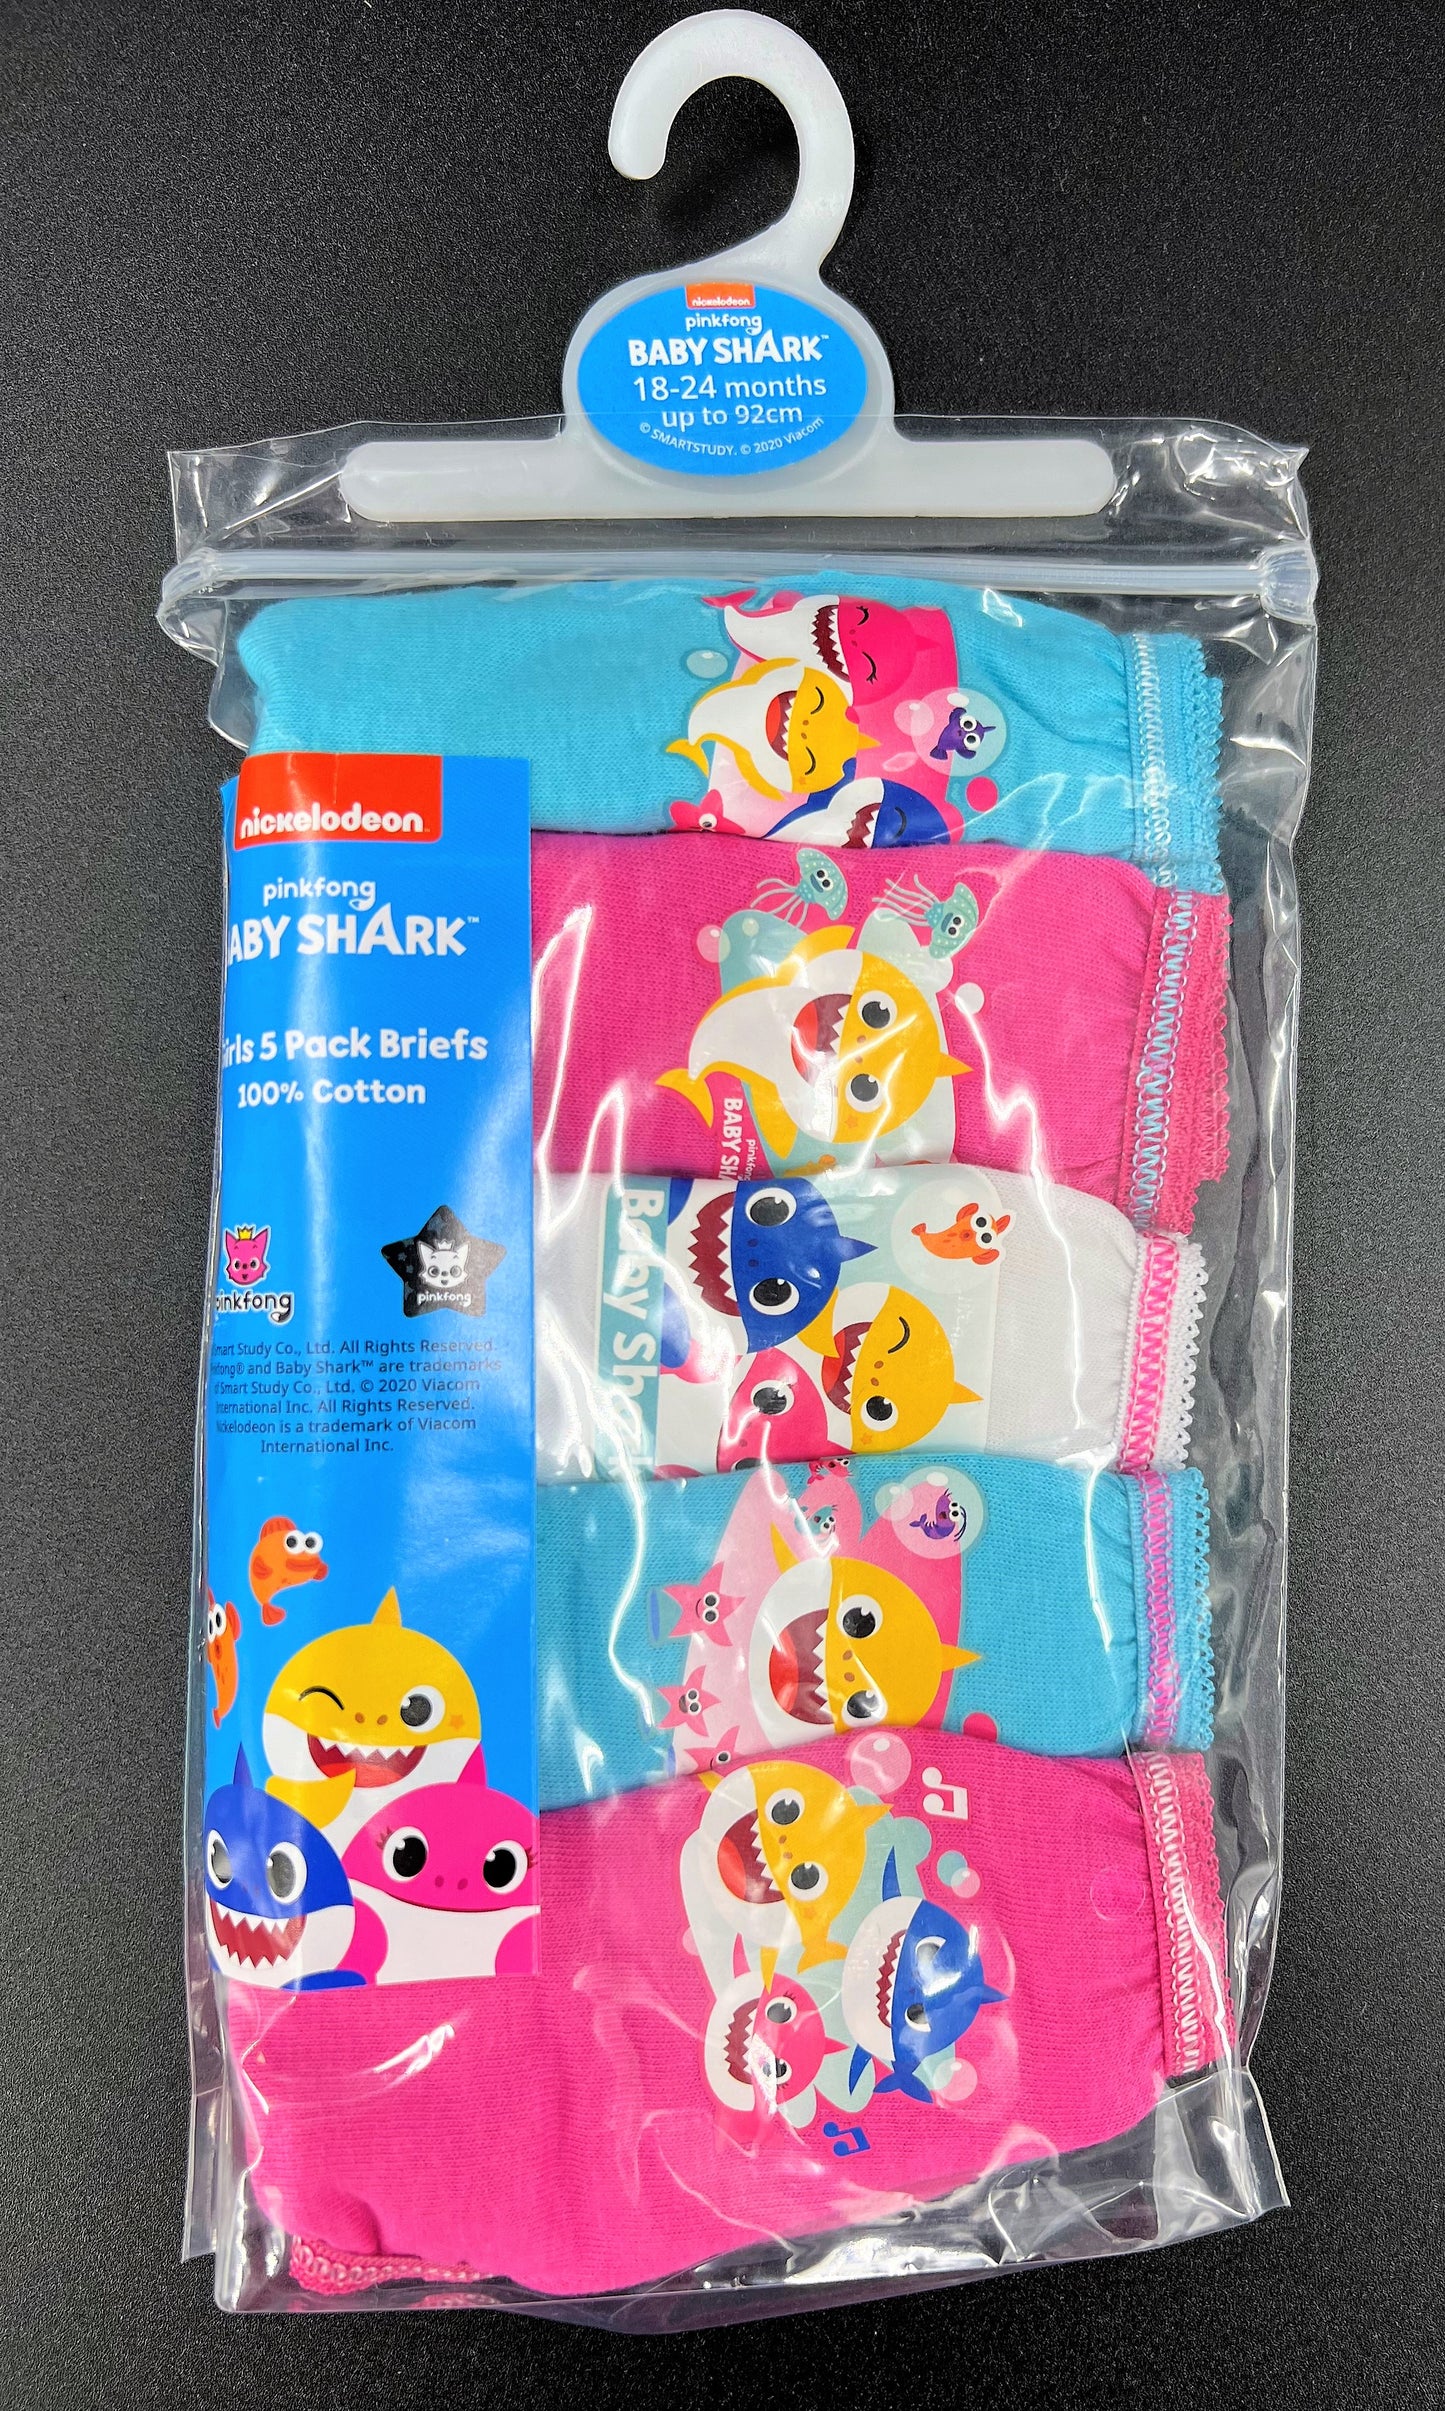 Girls Baby Shark Knickers "Smile" 5pk  1-5 Years Available